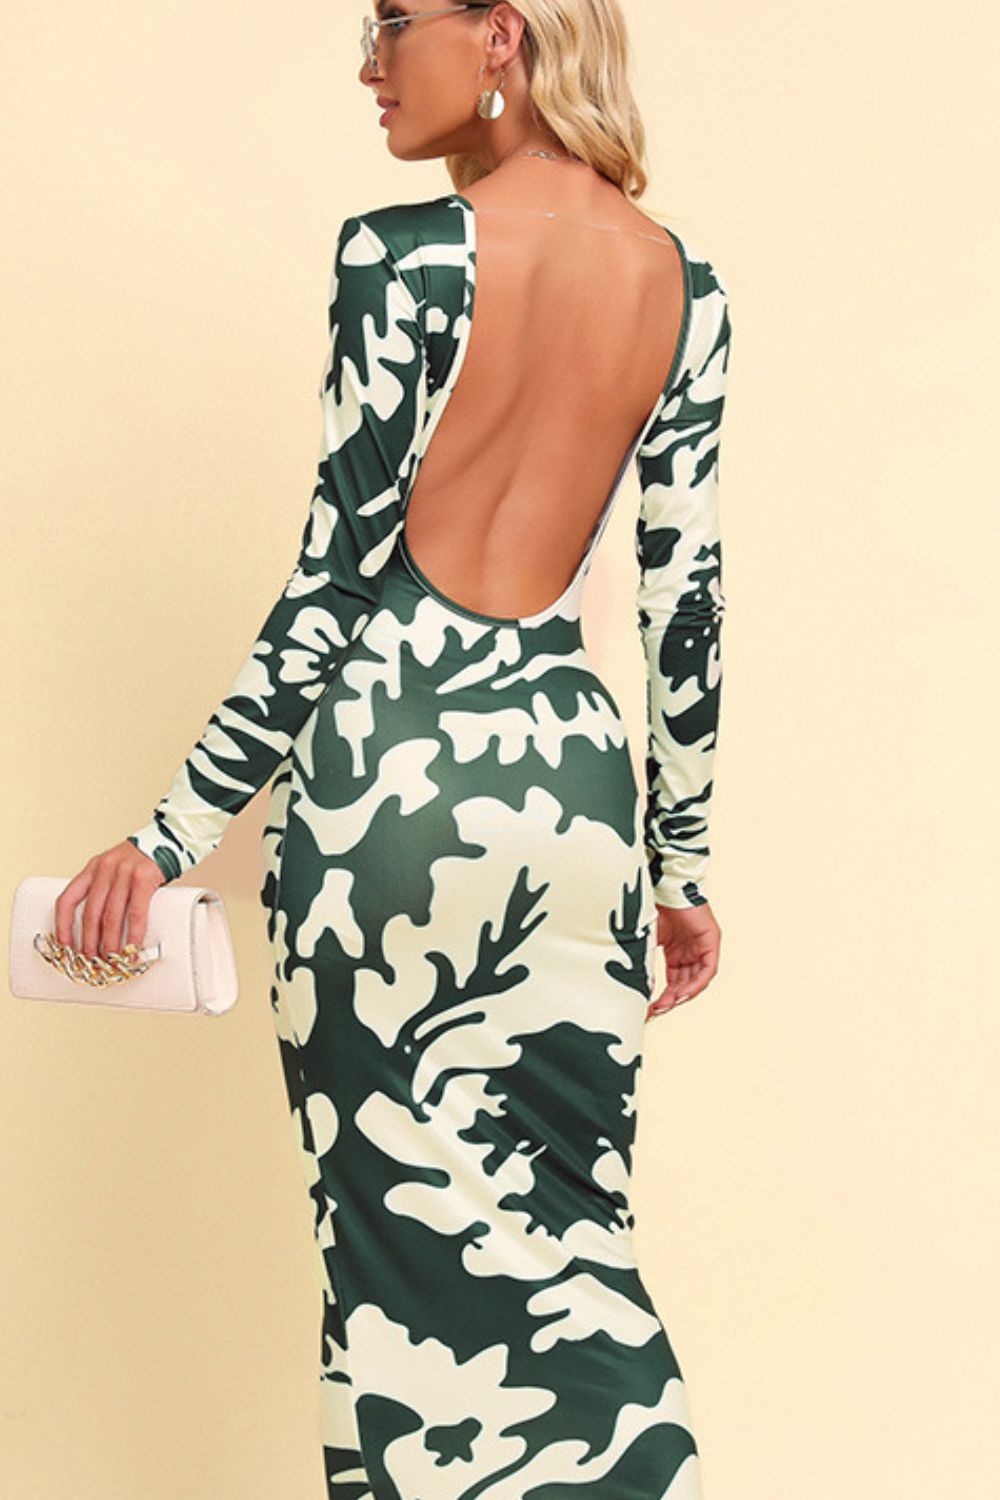 Printed Backless Long Sleeve Maxi Dress - Casual & Maxi Dresses - FITGGINS